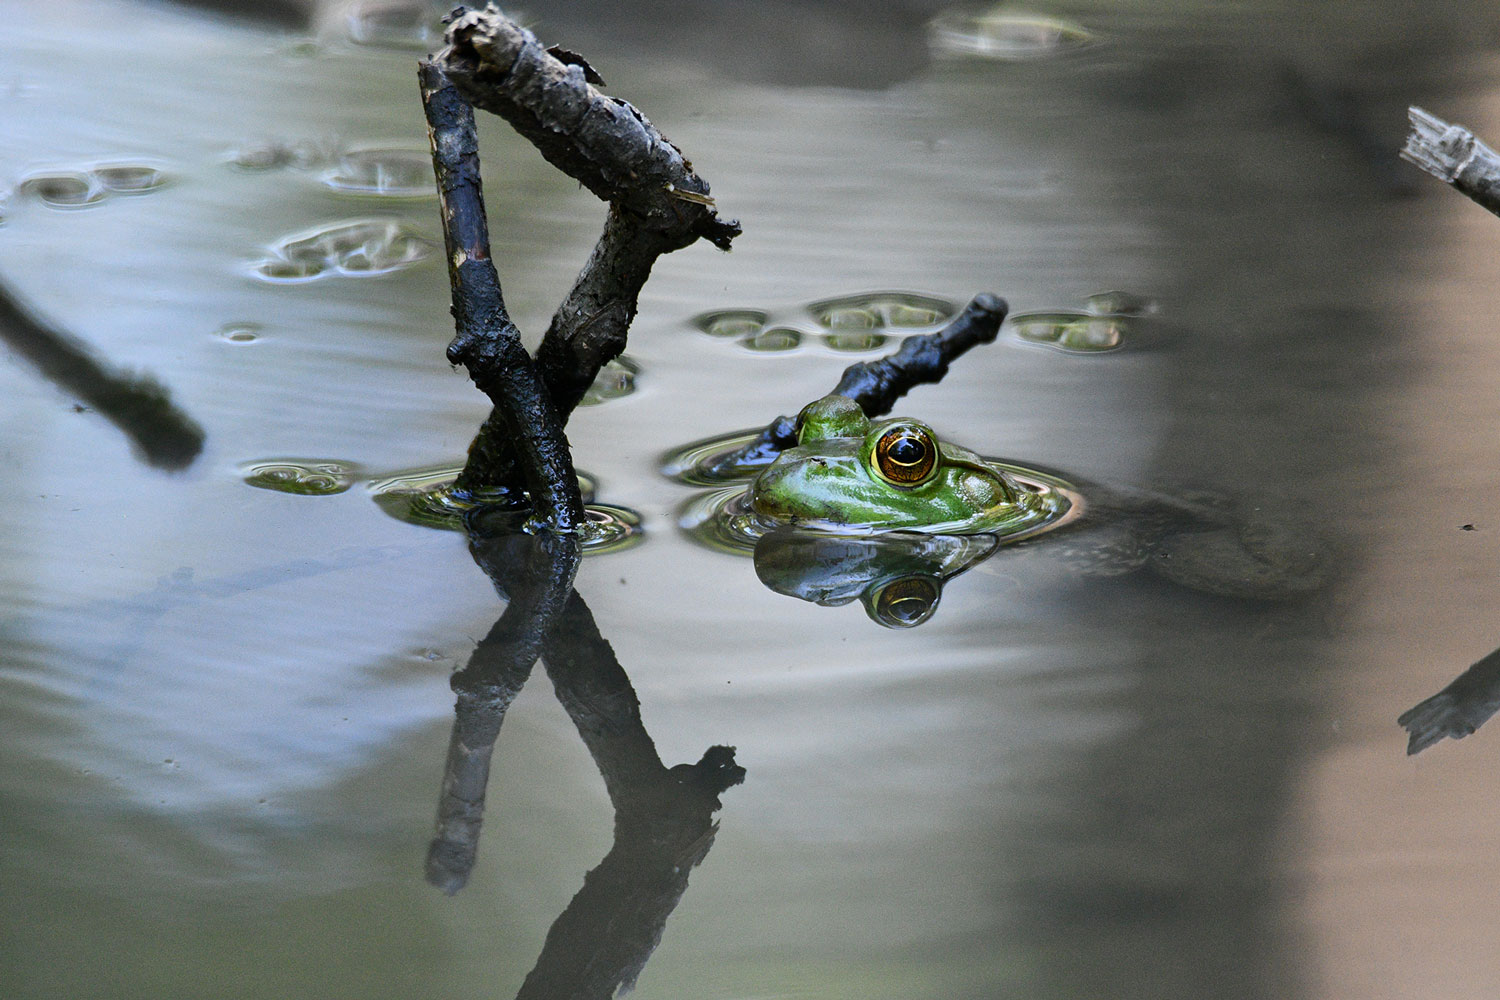 A frog in the water with its head sticking above the surface.